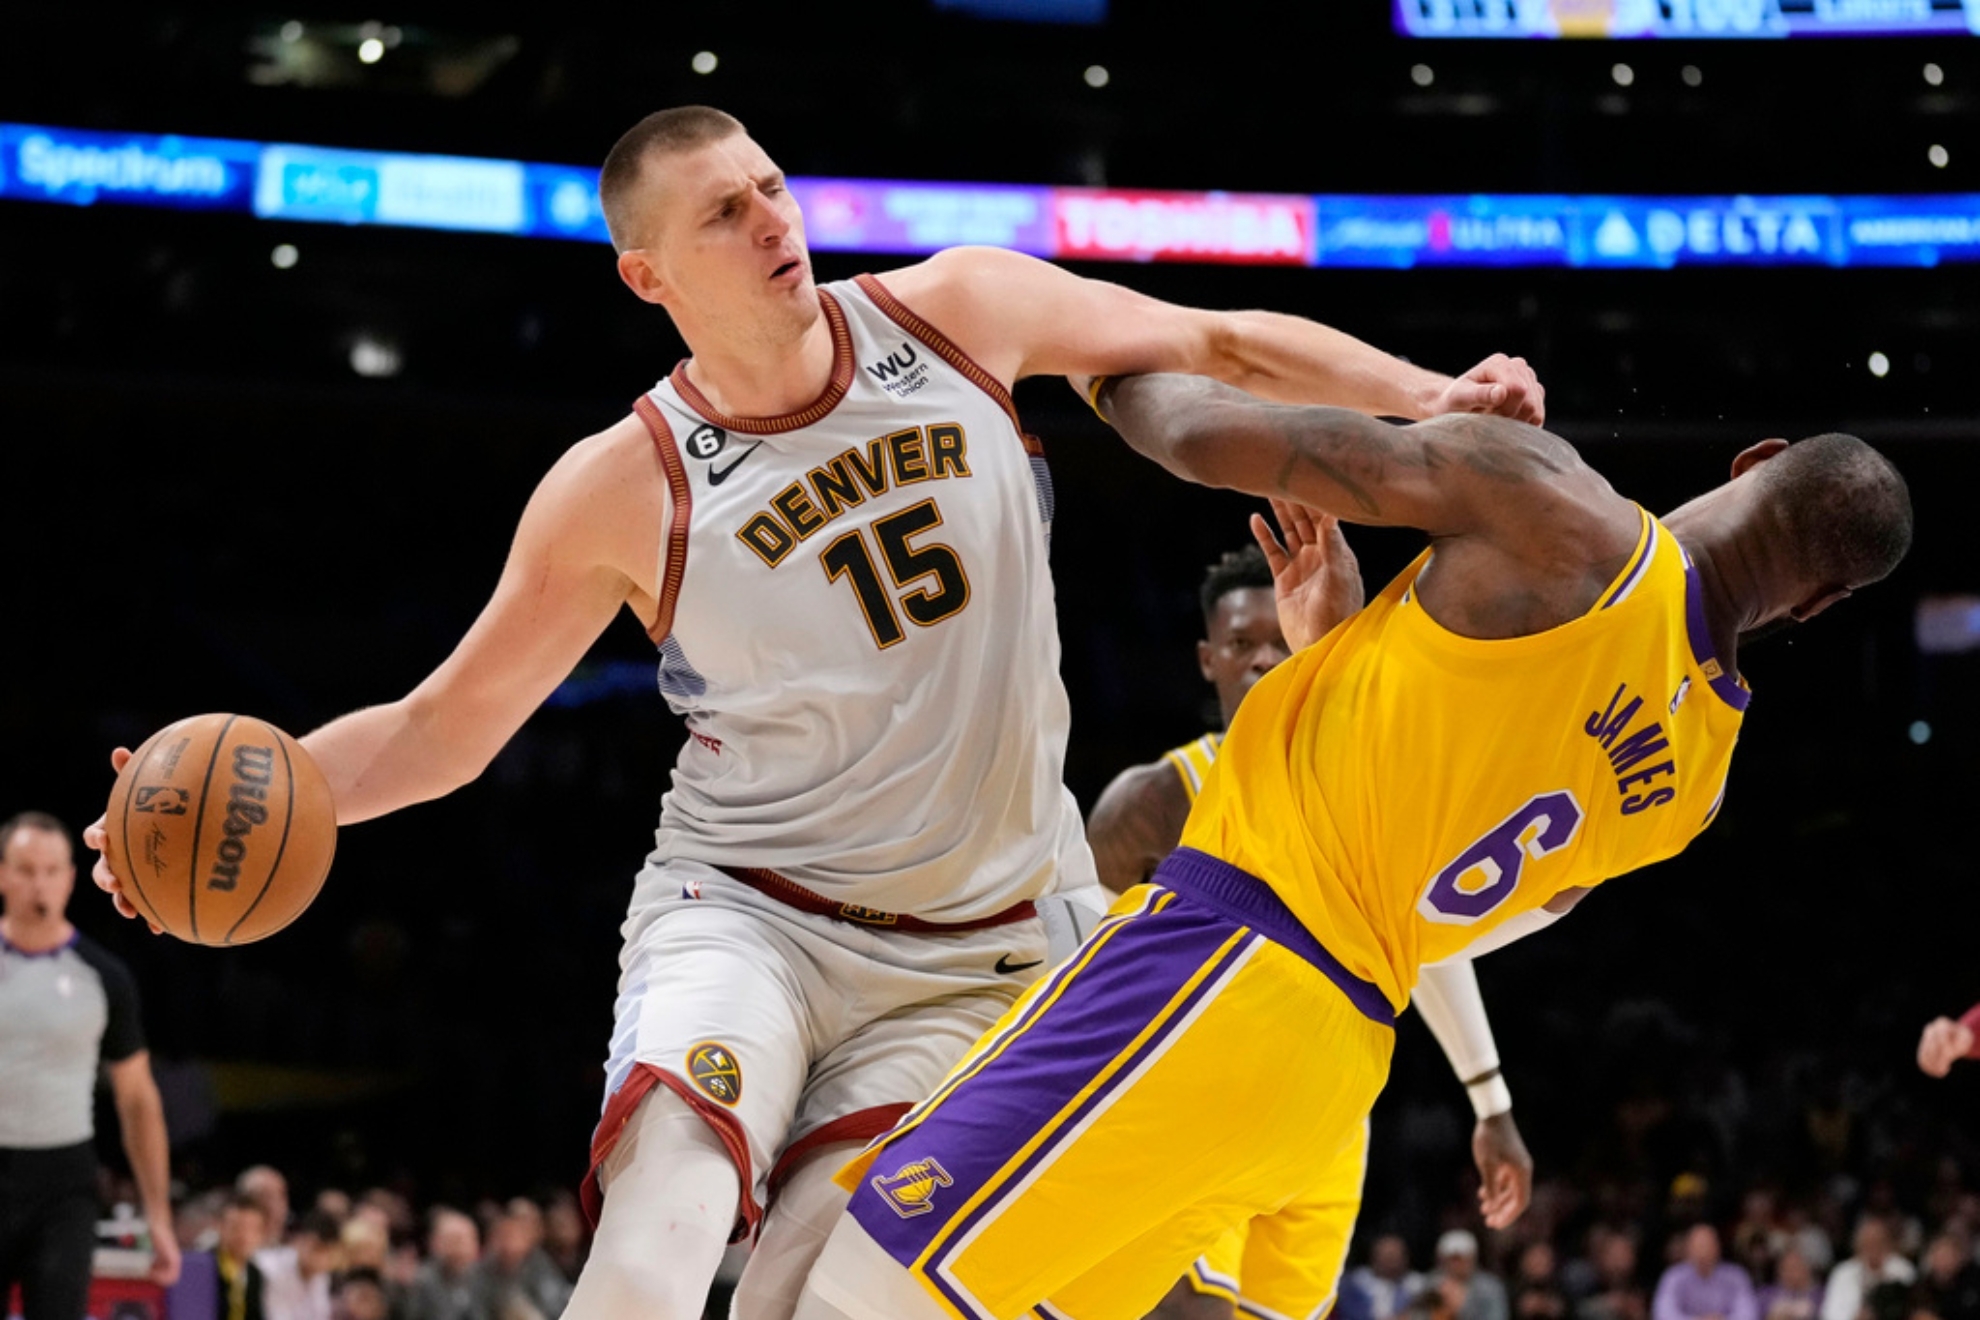 Jokic will face the Lakers on opening night in a rematch of the conference finals